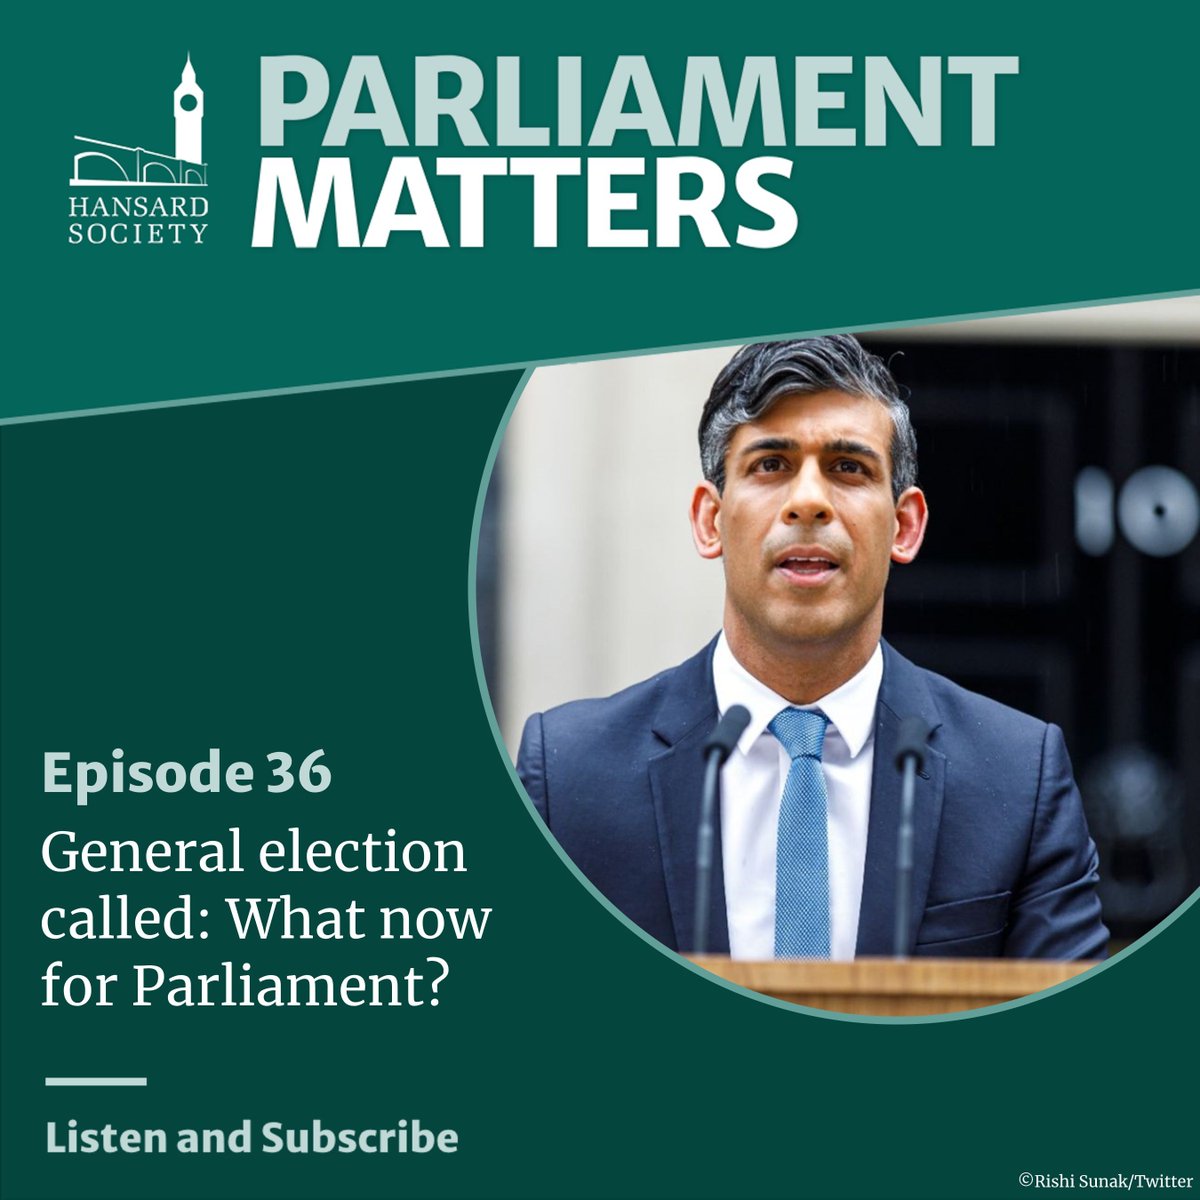 📣 NEW #ParliamentMatters podcast episode is out tomorrow morning (24/05) at 7am. 

The election has caught many on the hop but what does it mean for Parliament - for MPs, legislation and select committees? 

Subscribe to make sure you don't miss it. 
buff.ly/4axFQVh